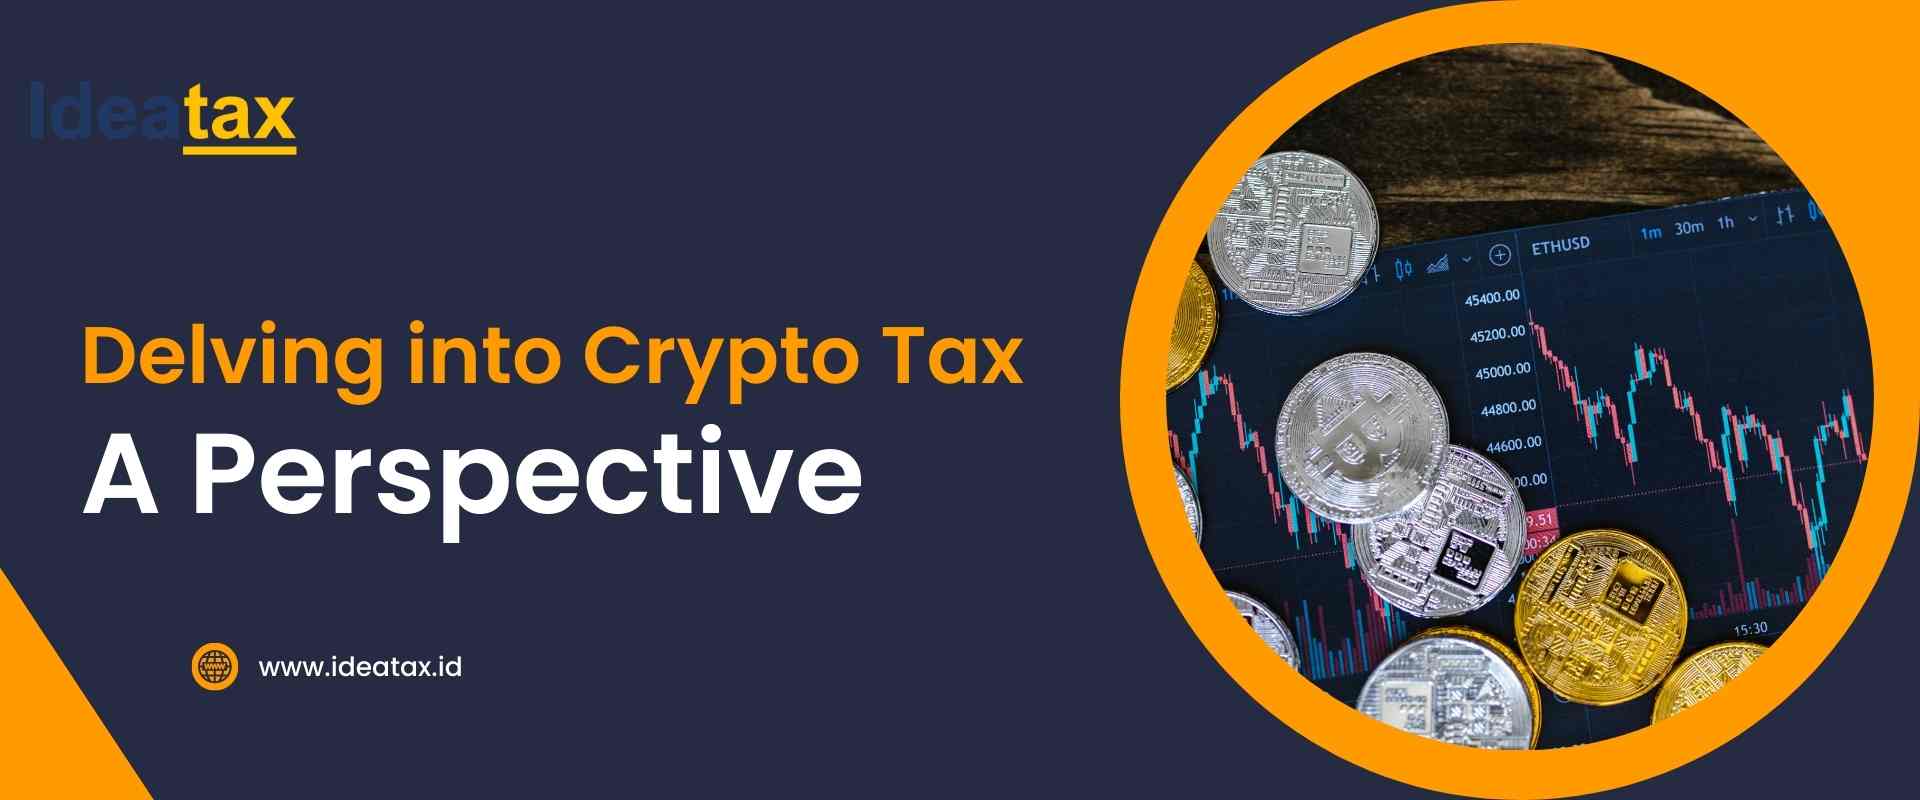 Delving into Crypto Tax: A Perspective